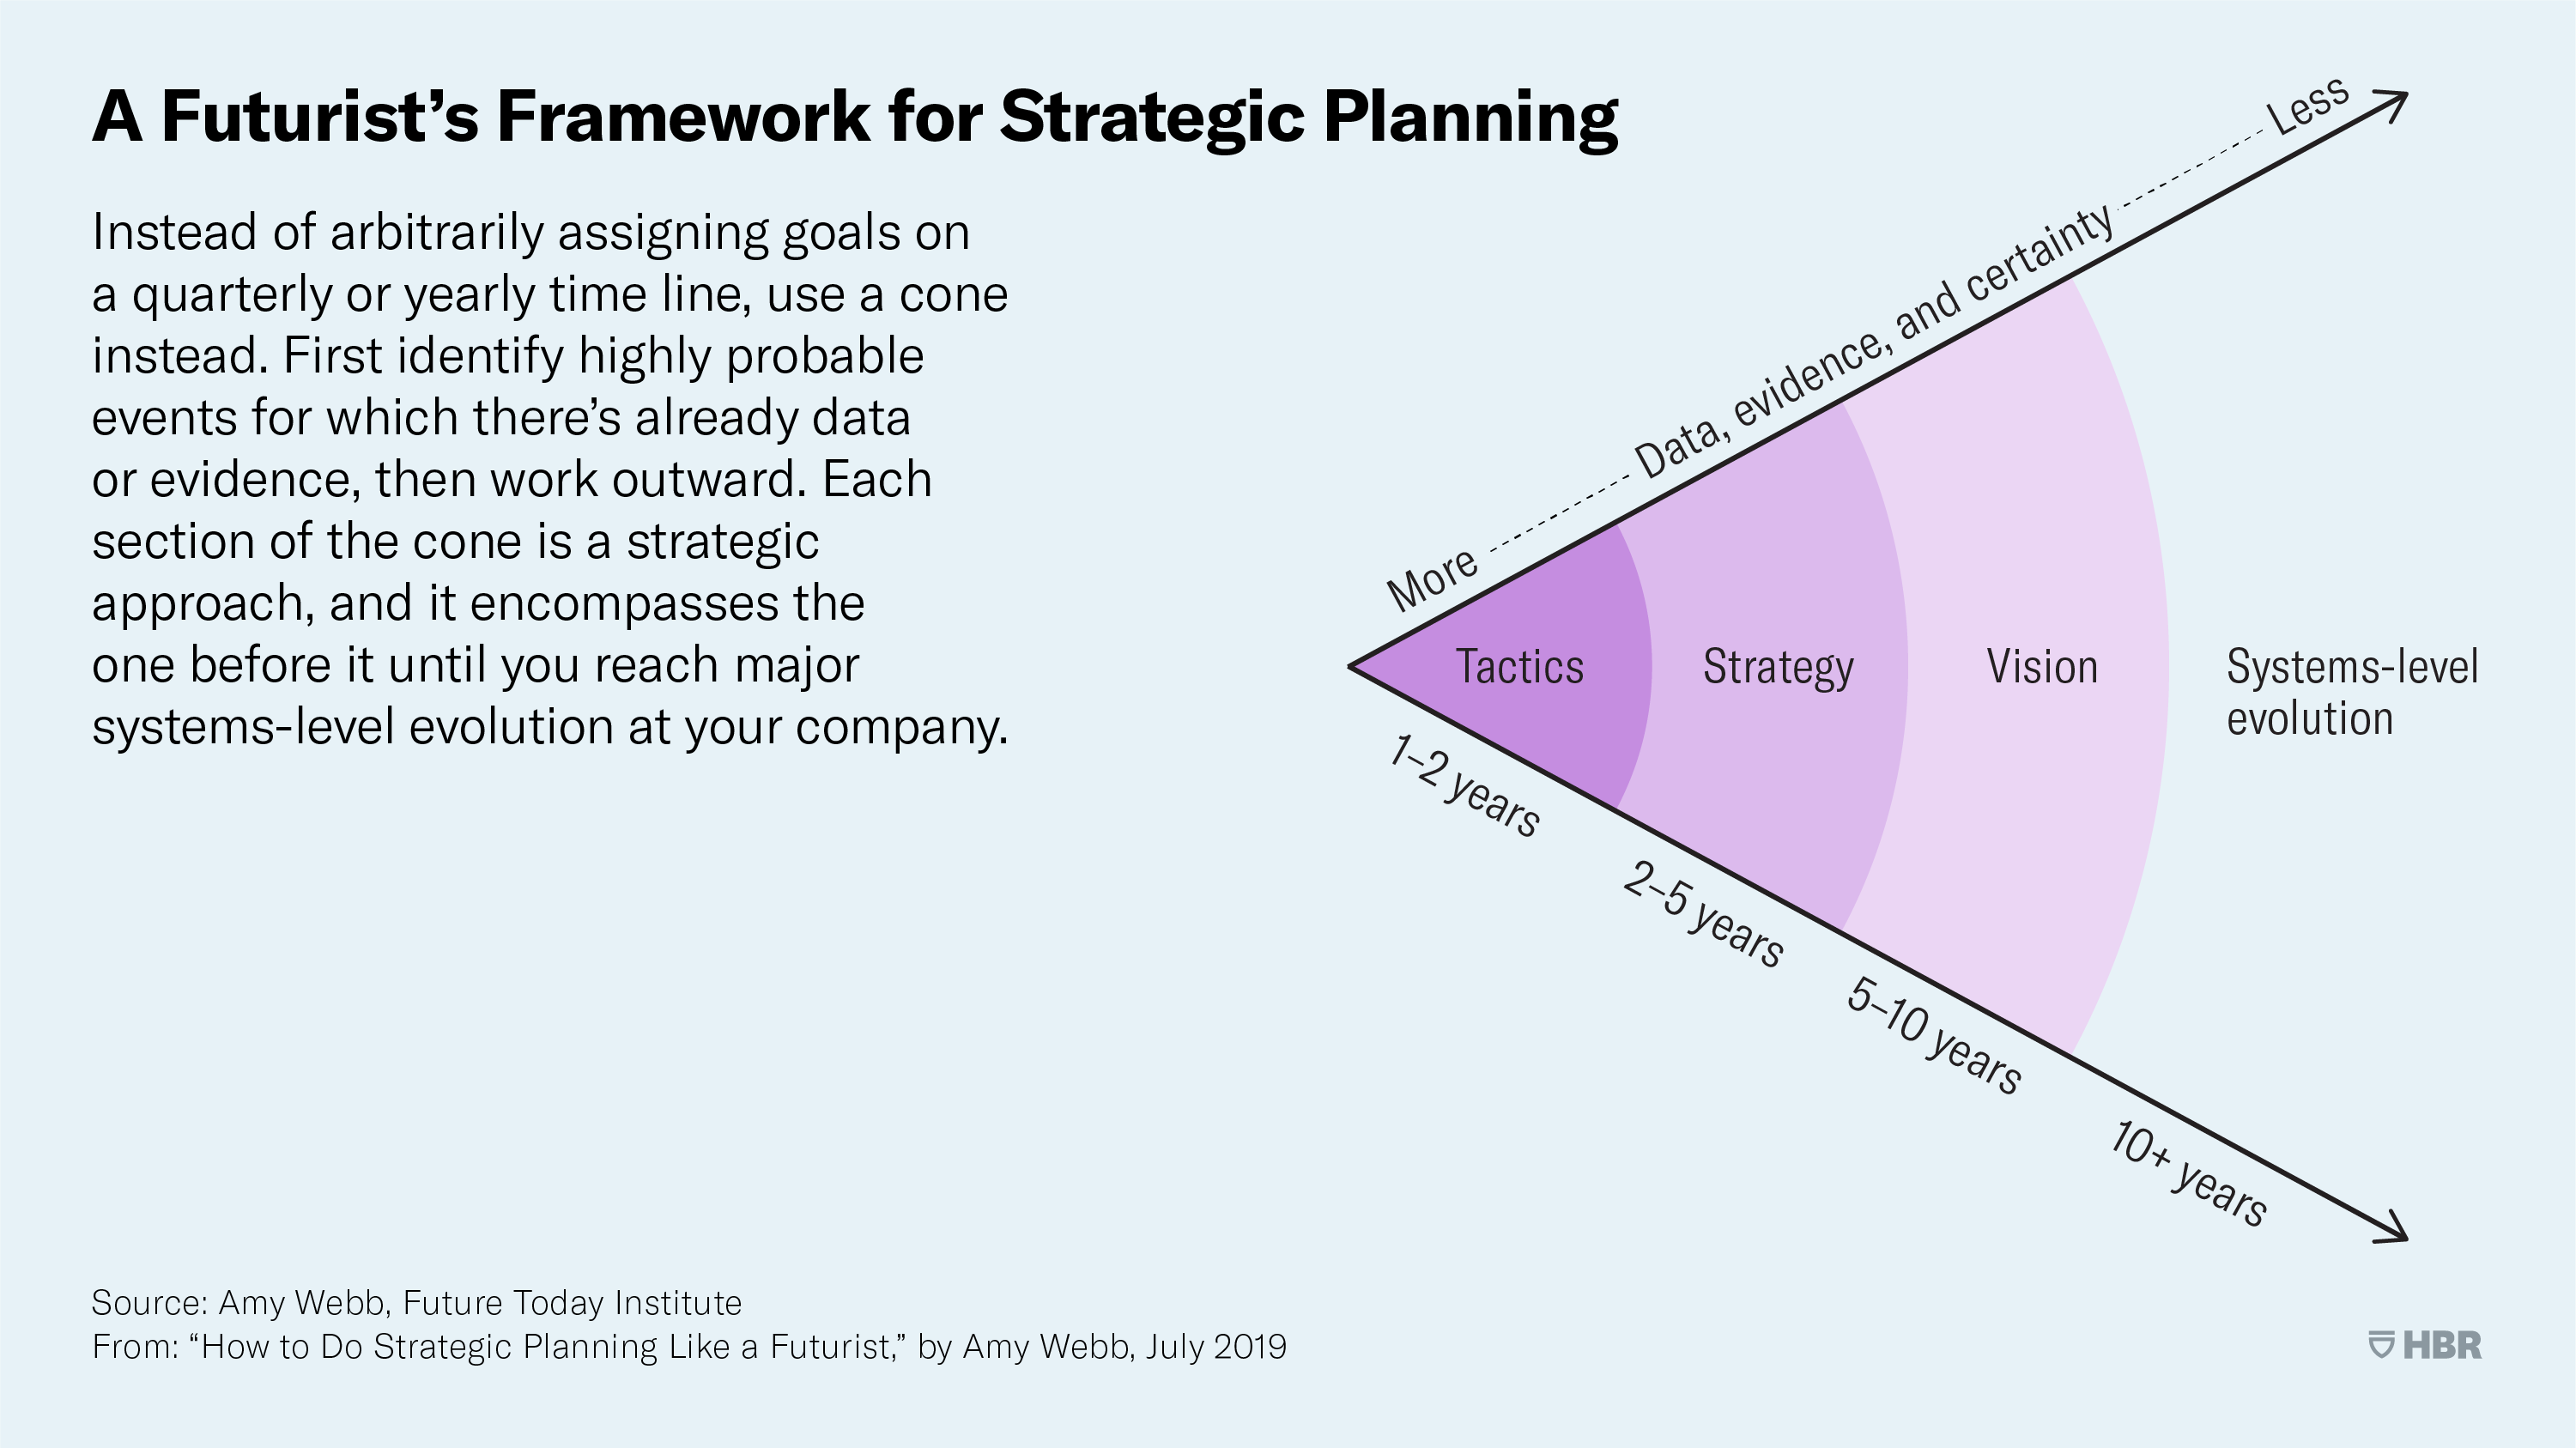 A Futurist's Framework for Stratetic Planning